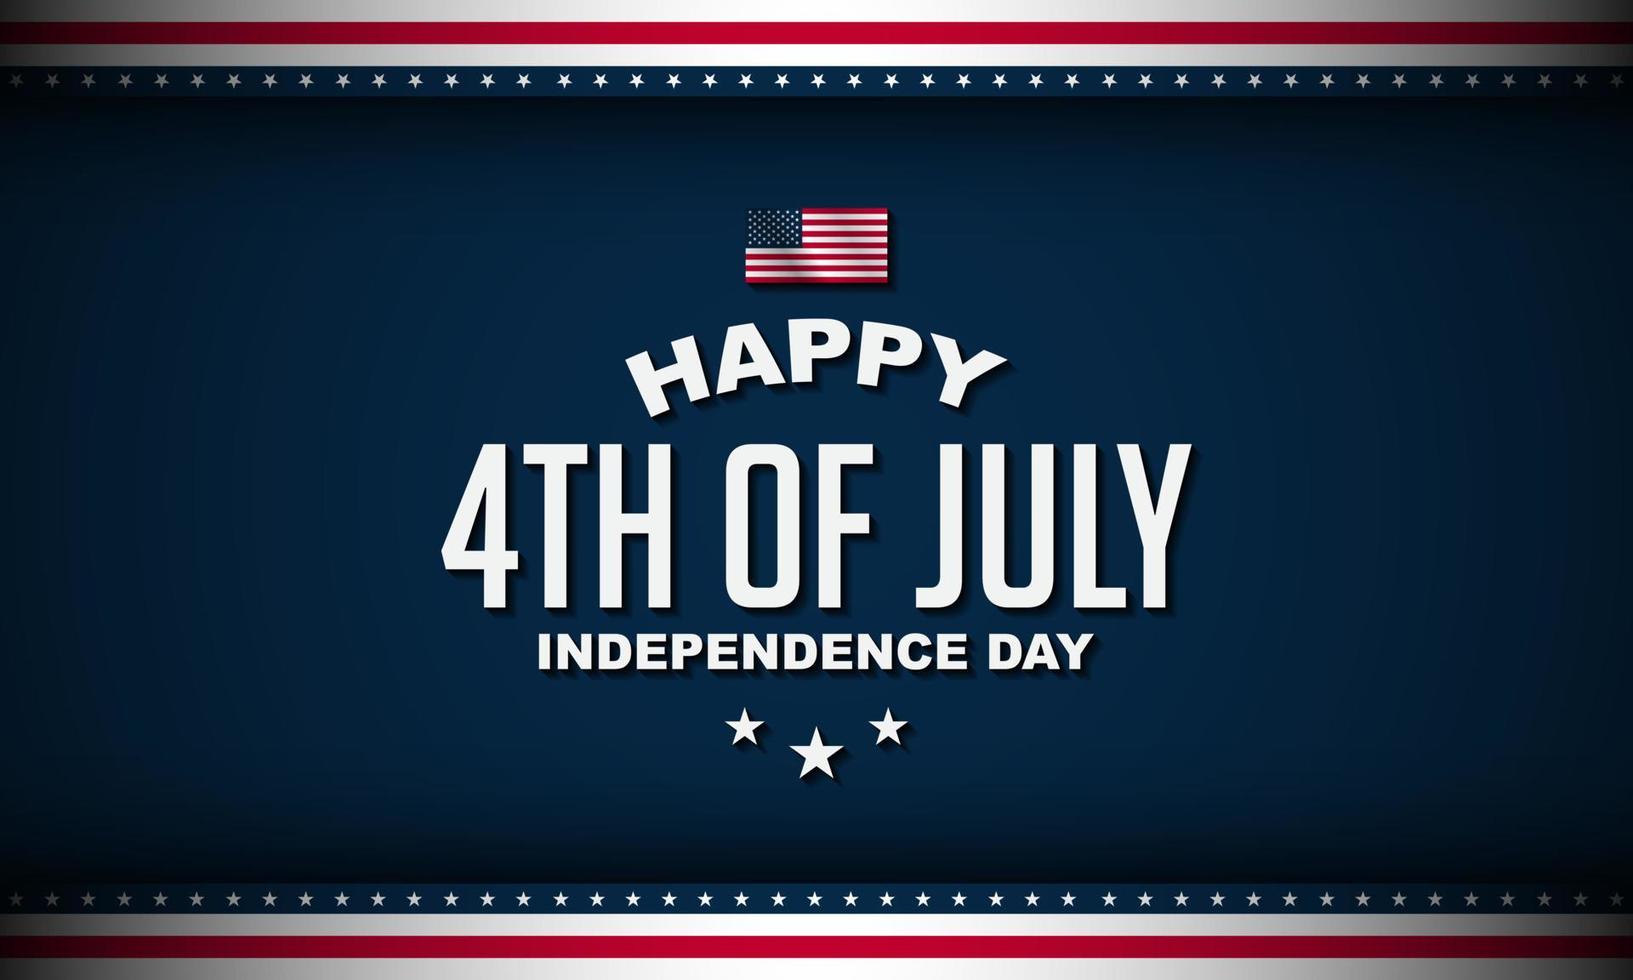 United States of America Independence Day Background Design. vector